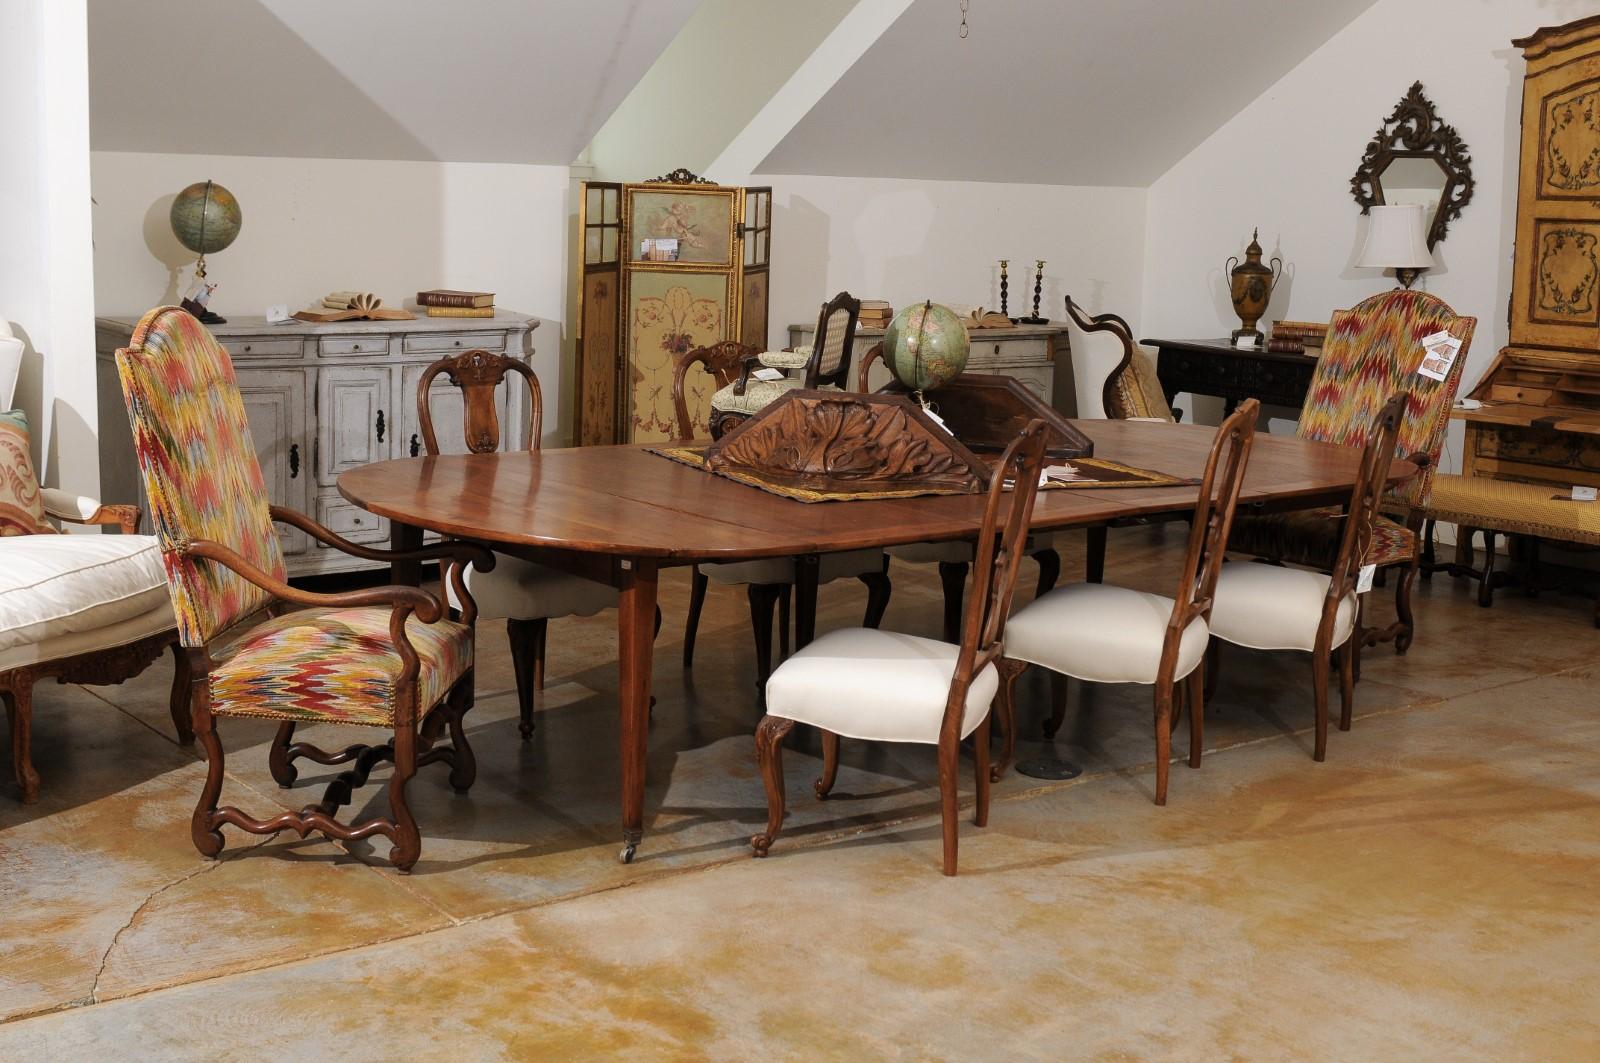 A French Napoleon III period walnut oval extension dining room table from the mid-19th century, with drop leaves, four removable leaves, tapered legs and casters. Born in France during the 1850s, this French dining room table features a walnut oval